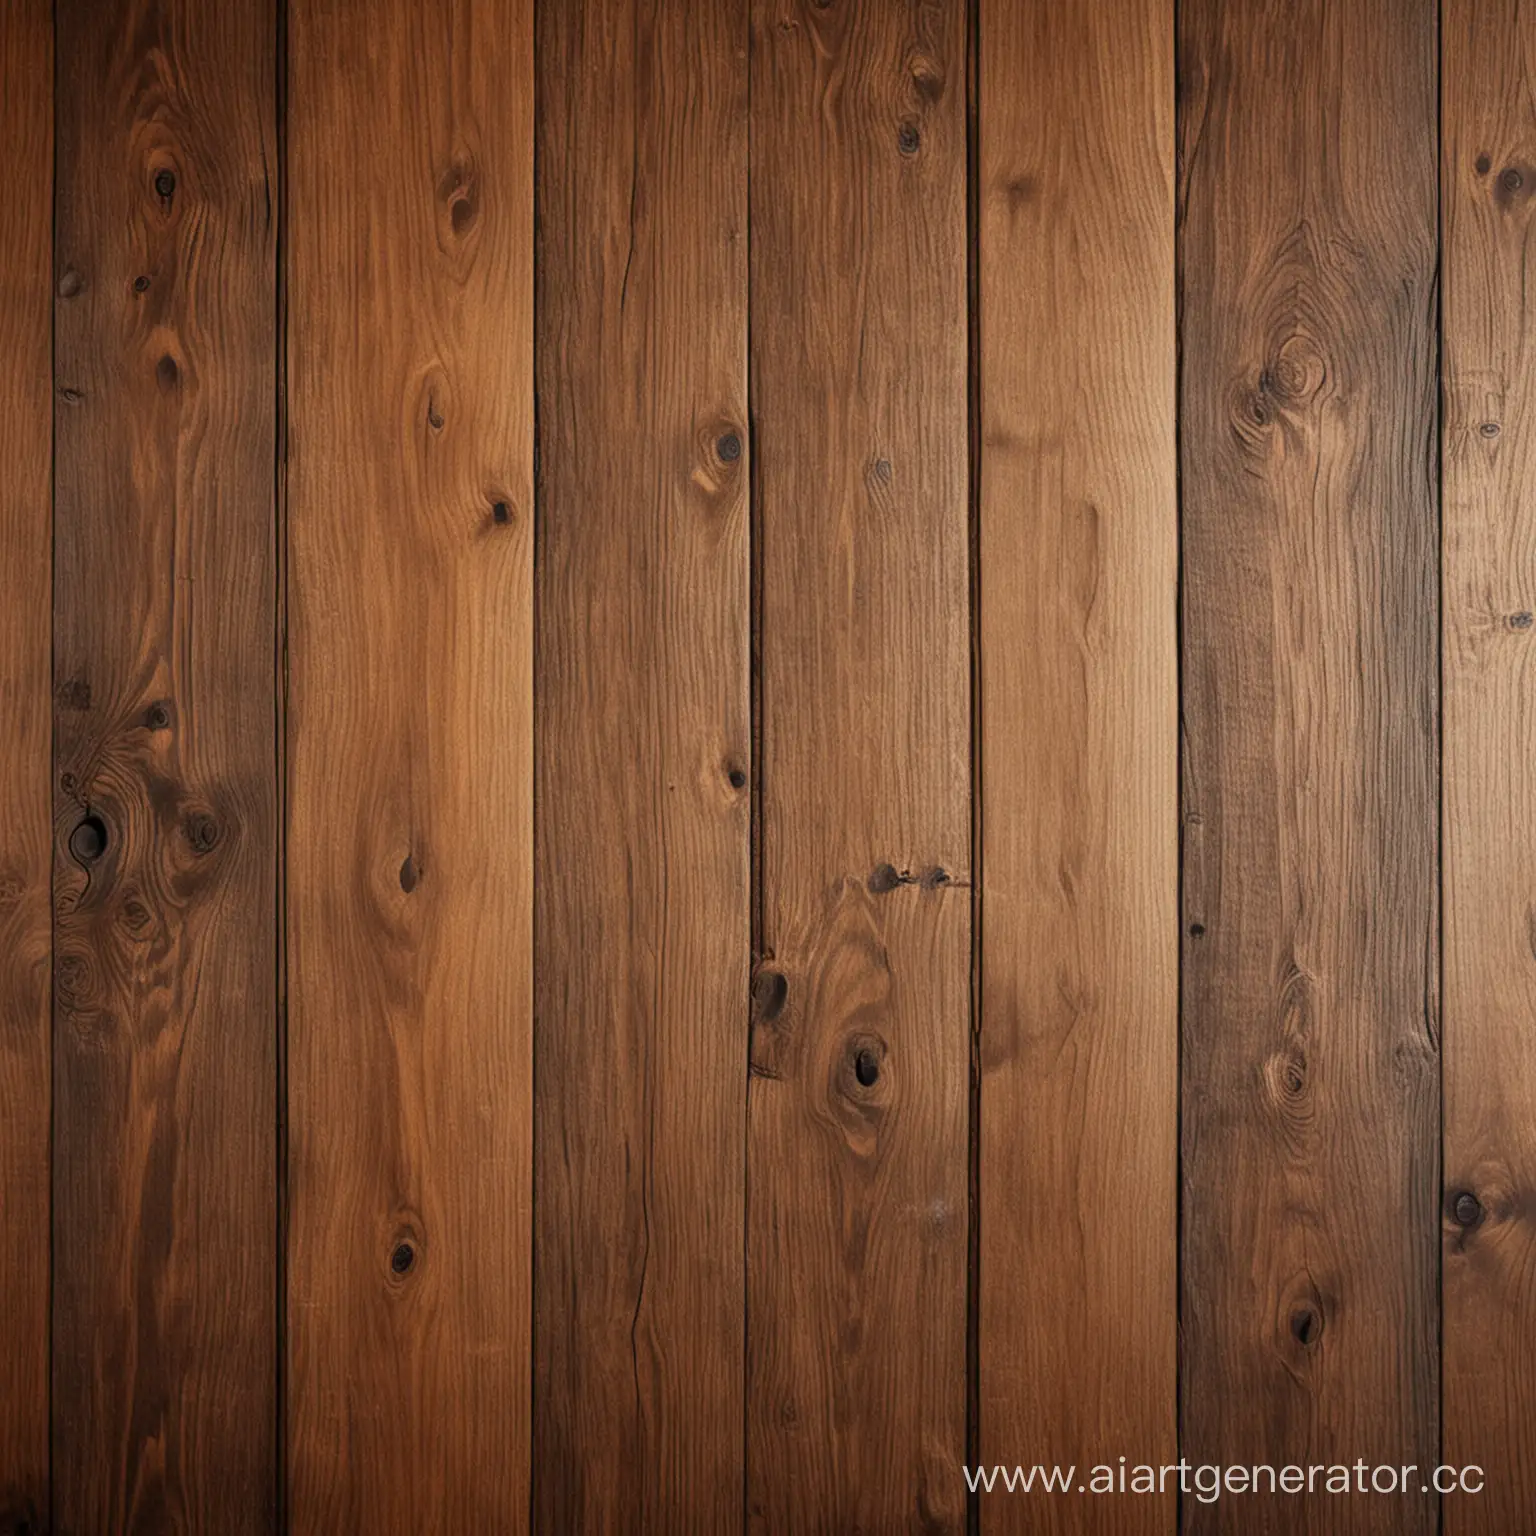 Rustic-Wooden-Boards-Background-for-Artistic-Creations